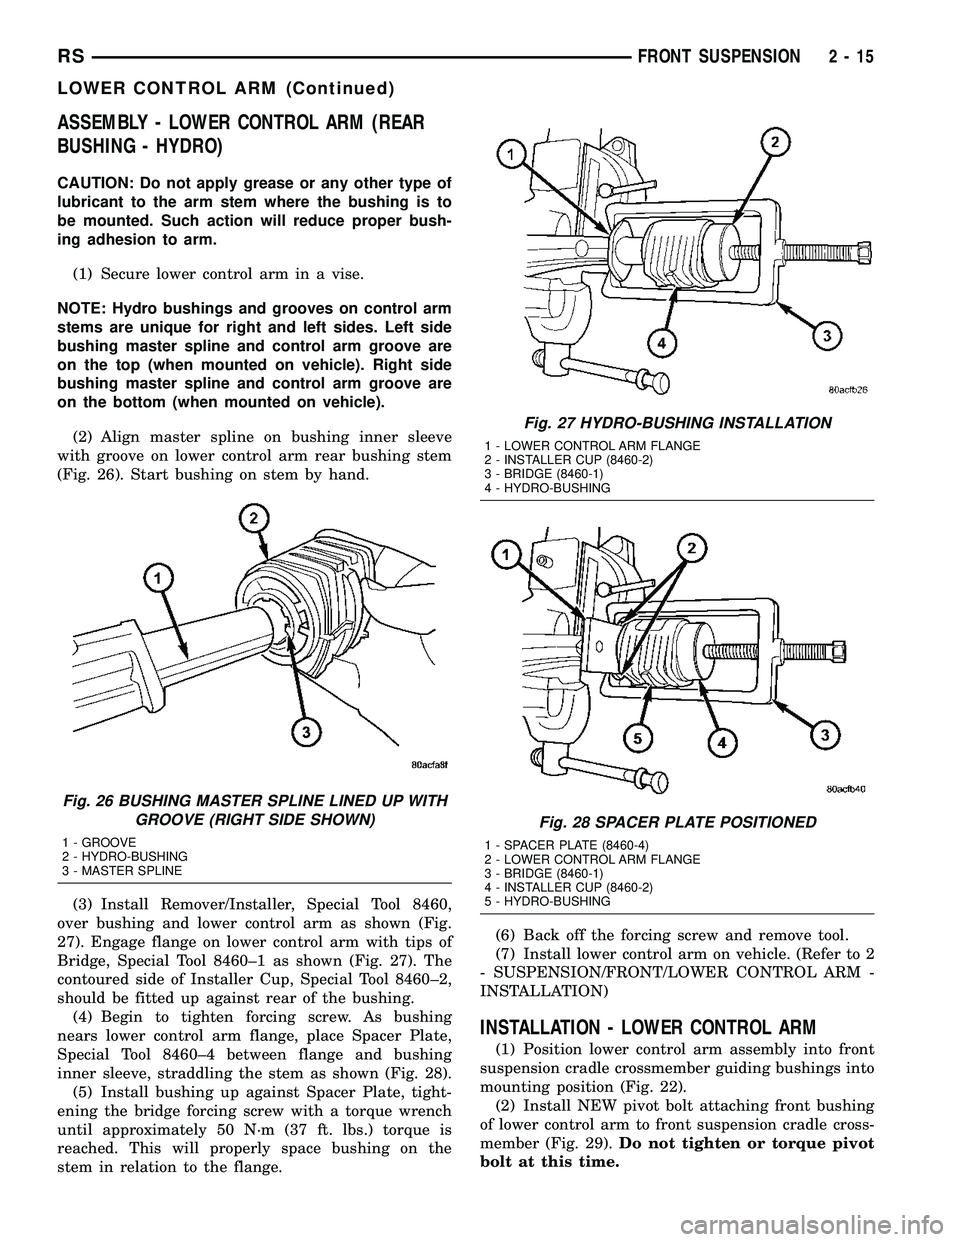 CHRYSLER VOYAGER 2005  Service Manual ASSEMBLY - LOWER CONTROL ARM (REAR
BUSHING - HYDRO)
CAUTION: Do not apply grease or any other type of
lubricant to the arm stem where the bushing is to
be mounted. Such action will reduce proper bush-